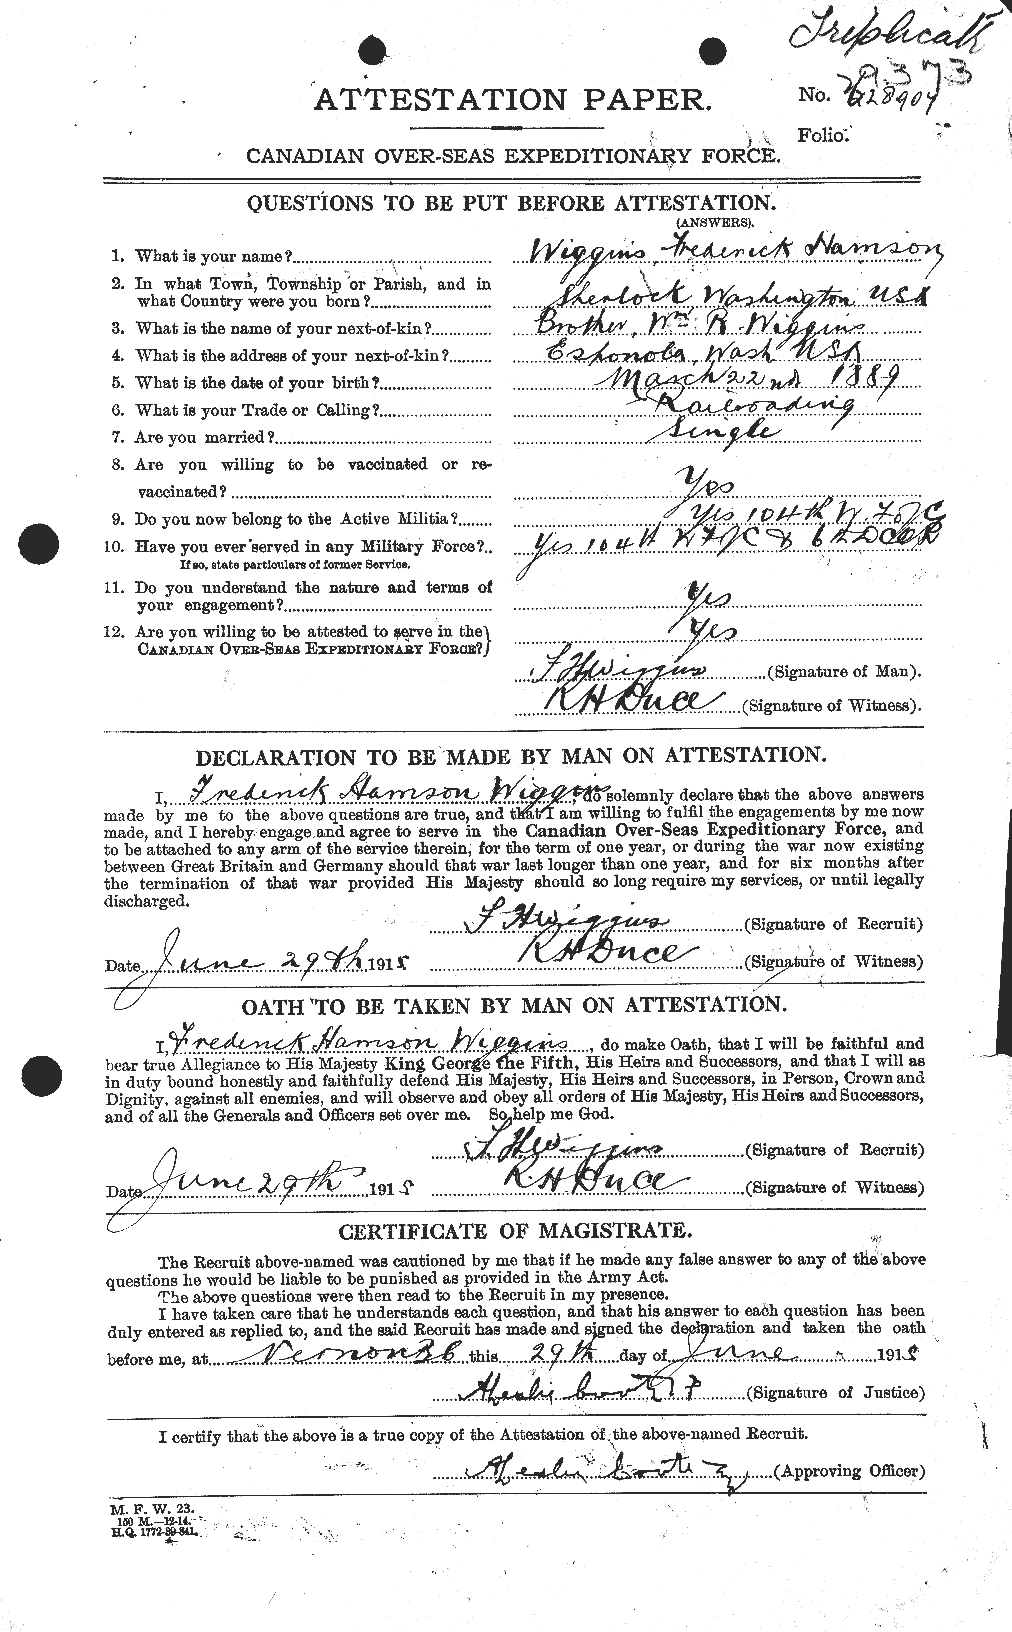 Personnel Records of the First World War - CEF 674620a